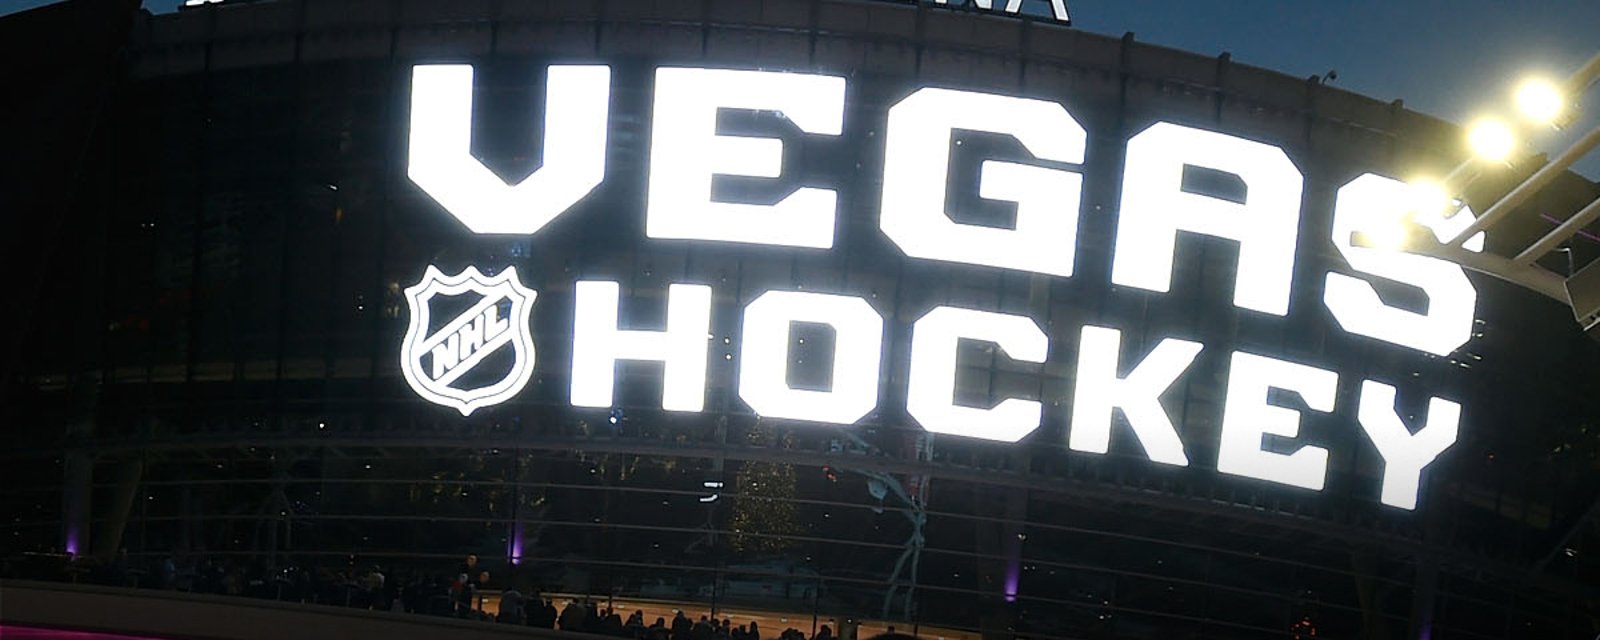 Rumor: Leafs likely targeting one of Vegas' most valuable players